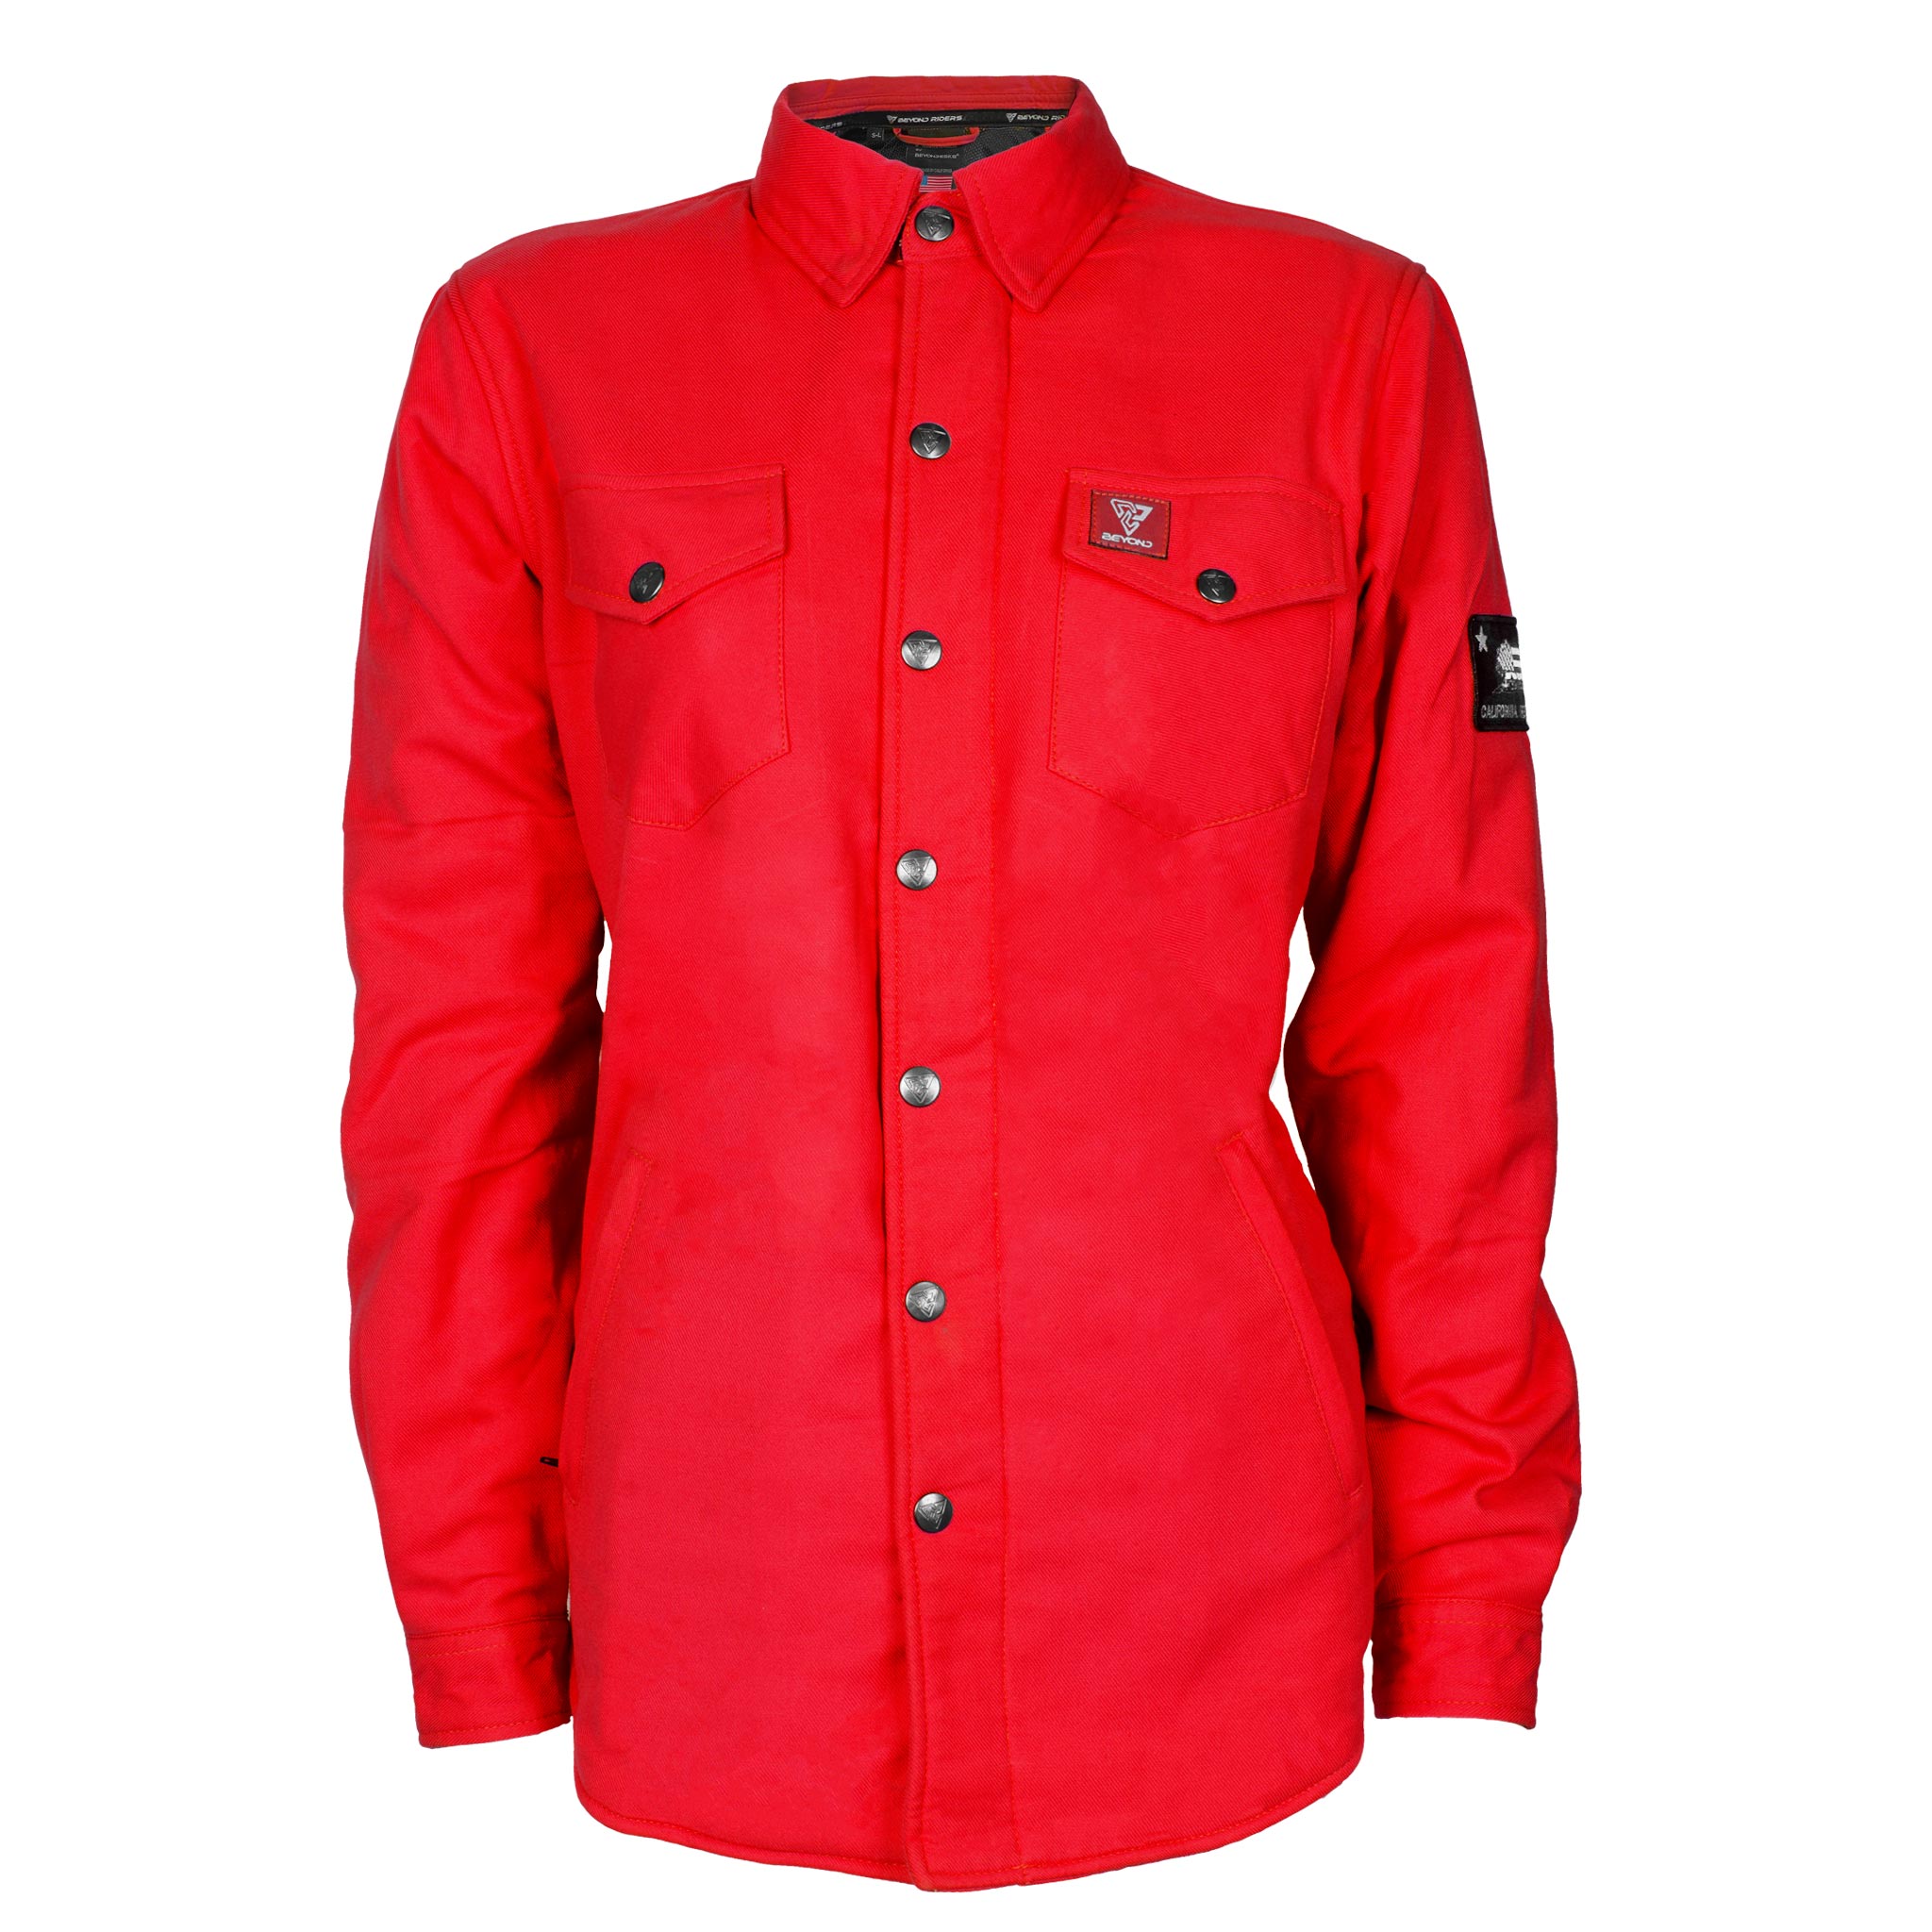 Protective Flannel Shirt for Women - Red Solid